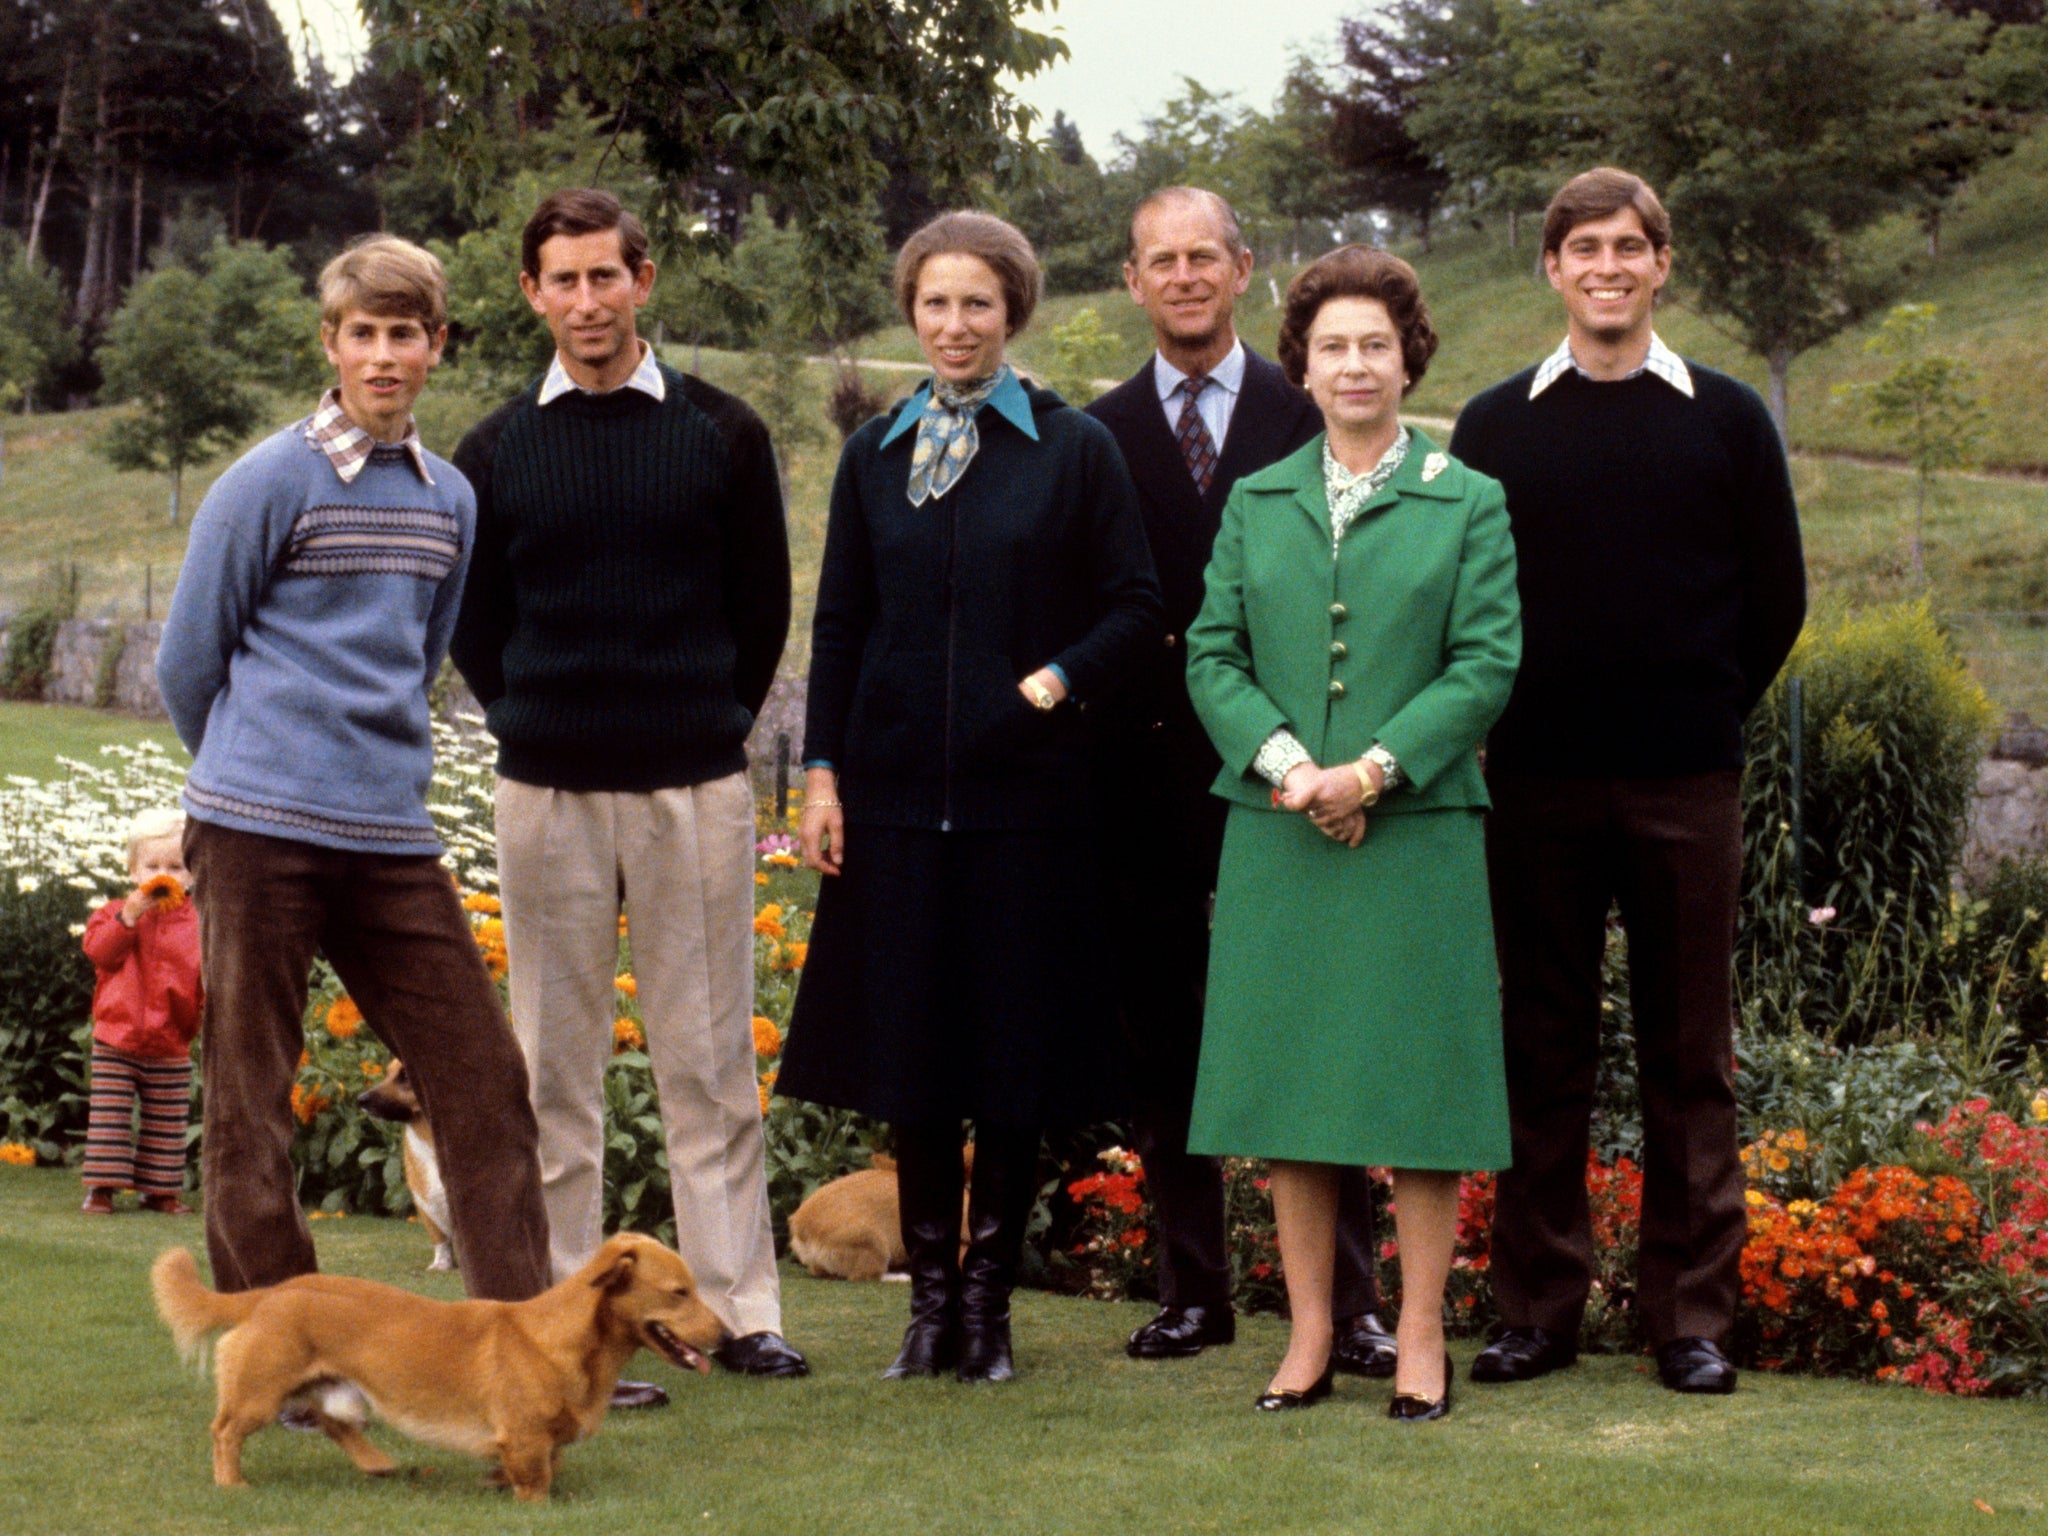 (L-R) Prince Edward, Prince Charles, Princess Anne, Prince Philip, the Queen and Prince Andrew at Balmoral in 1979